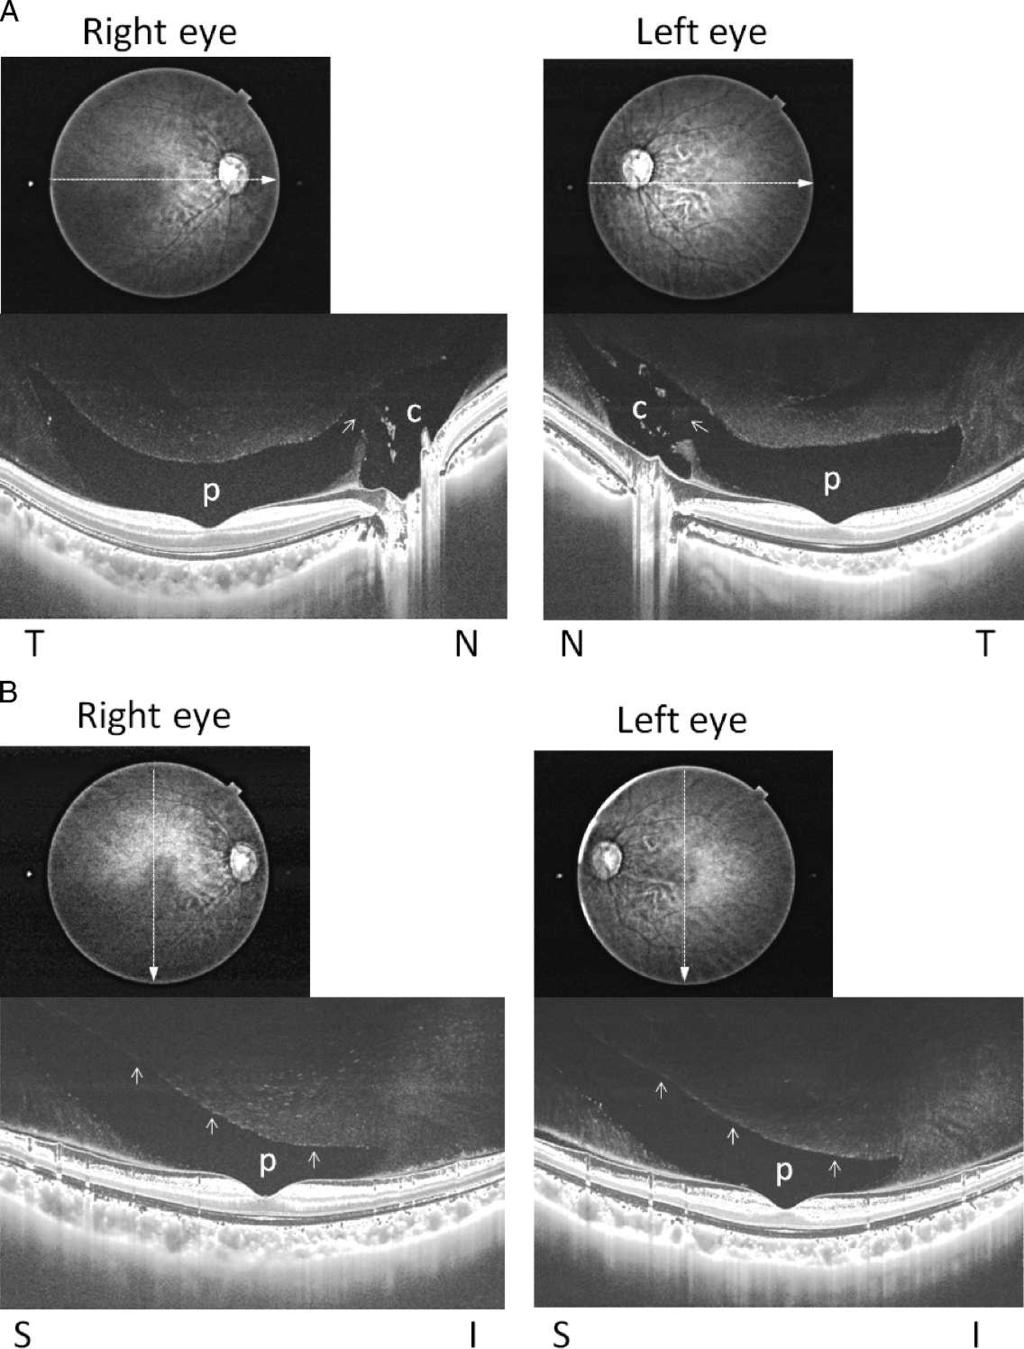 Posterior Precortical Vitreous Pocket Observation IOVS j May 2013 j Vol. 54 j No. 5 j 3104 FIGURE 2. Symmetrical posterior PPVPs were seen in both eyes of a 24-year-old woman.